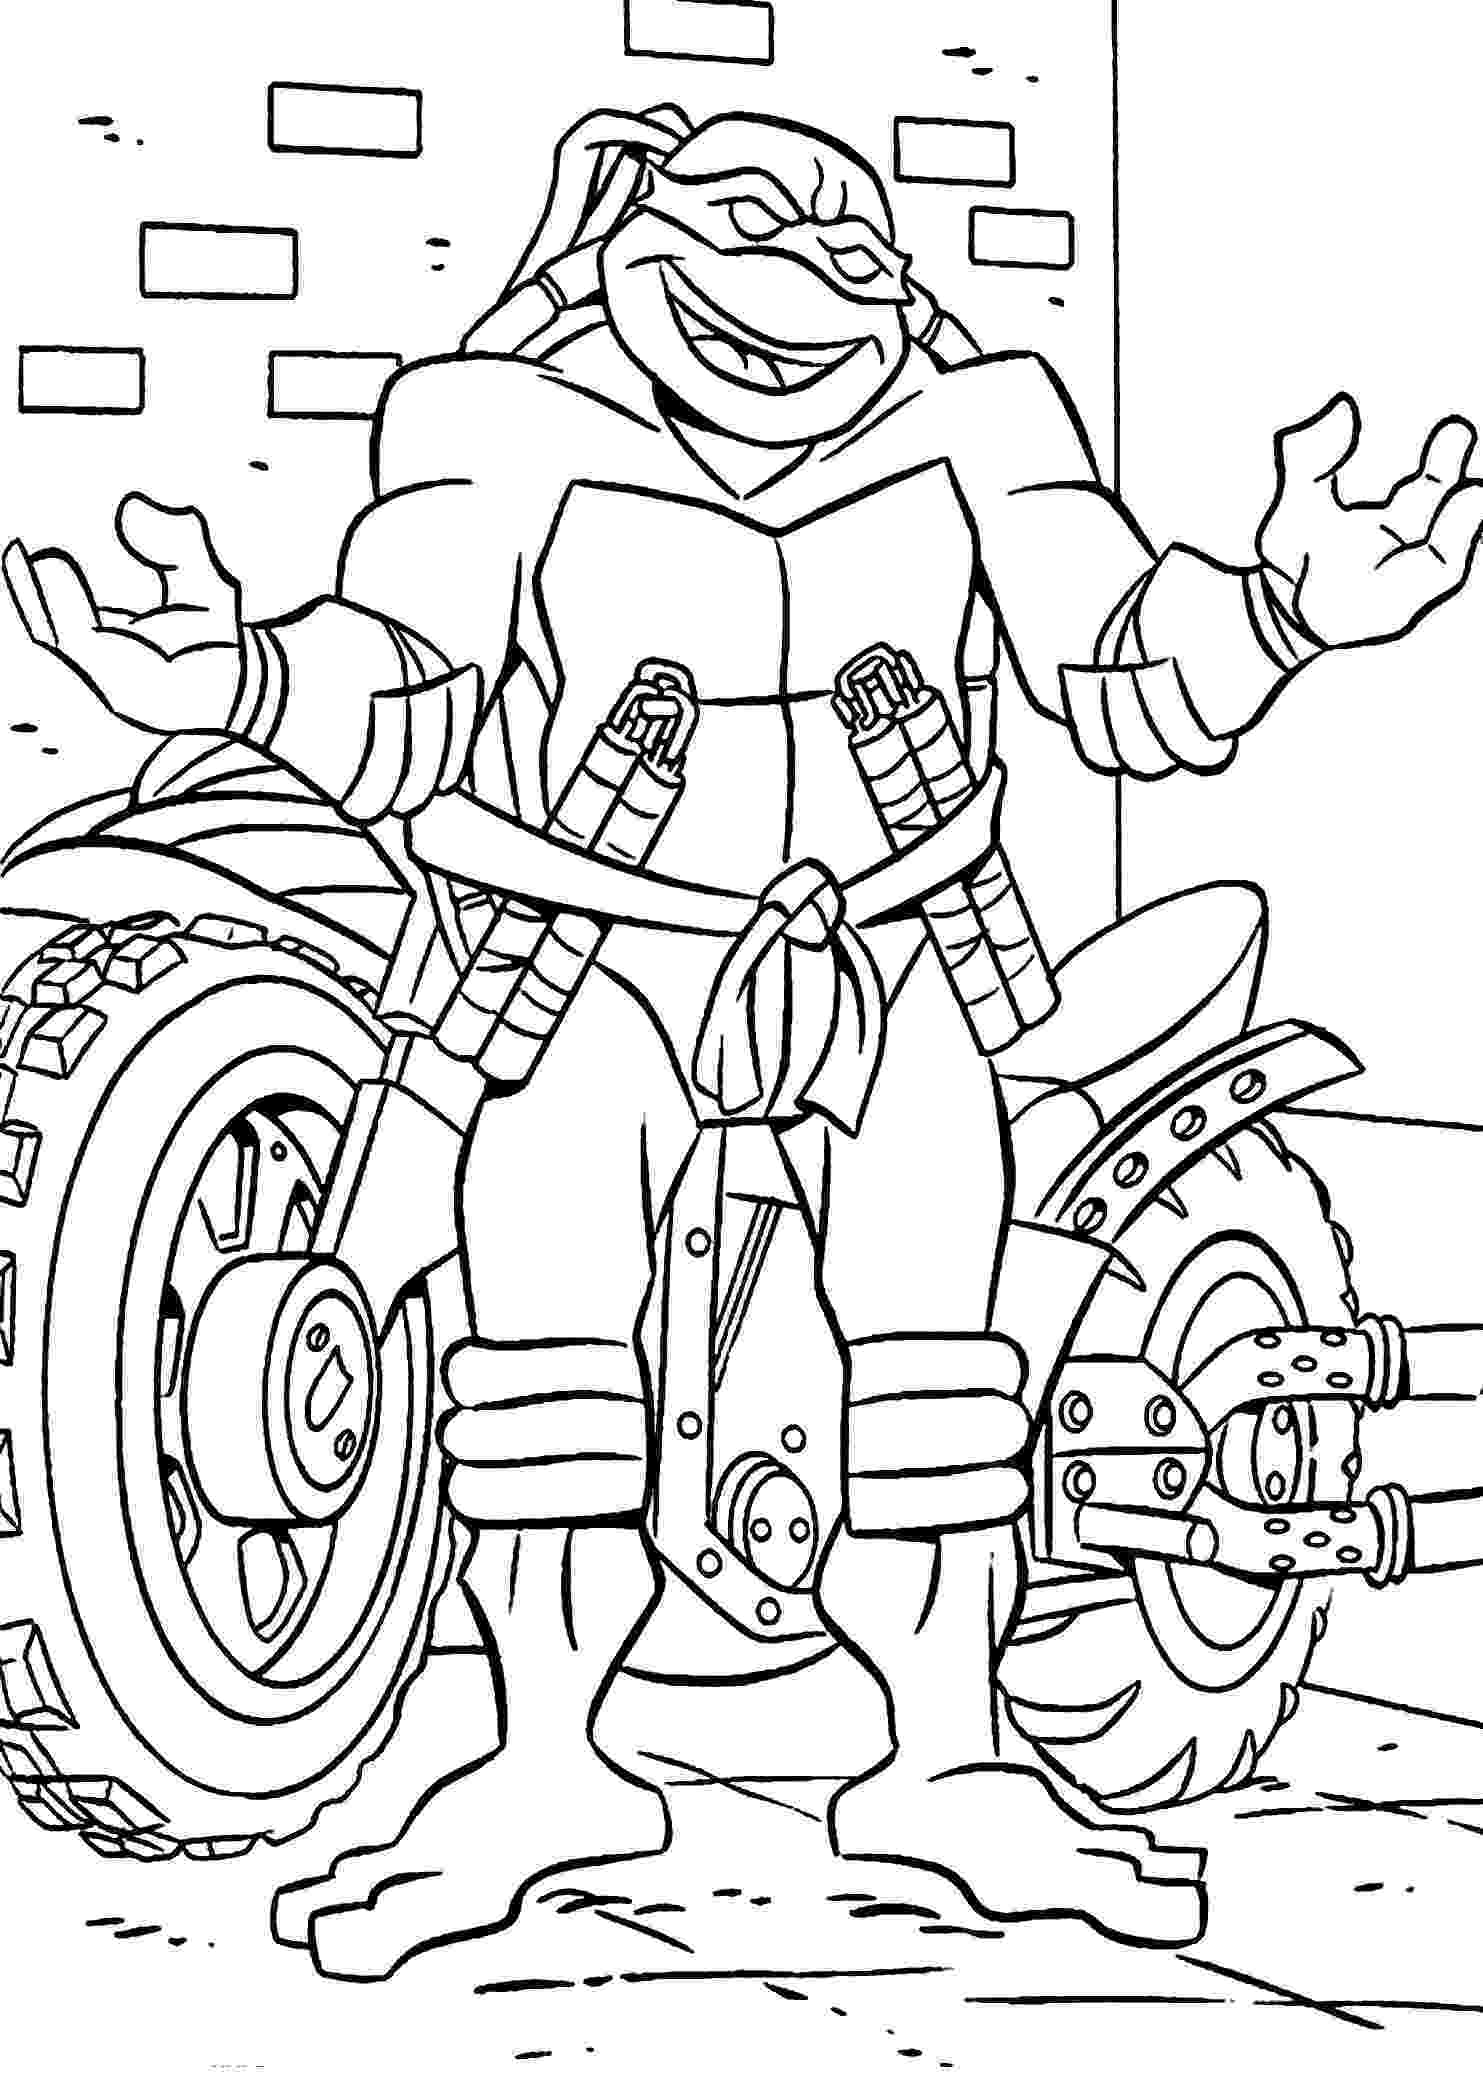 ninja turtles pictures to color teenage ninja turtle coloring pages download free to ninja color turtles pictures 